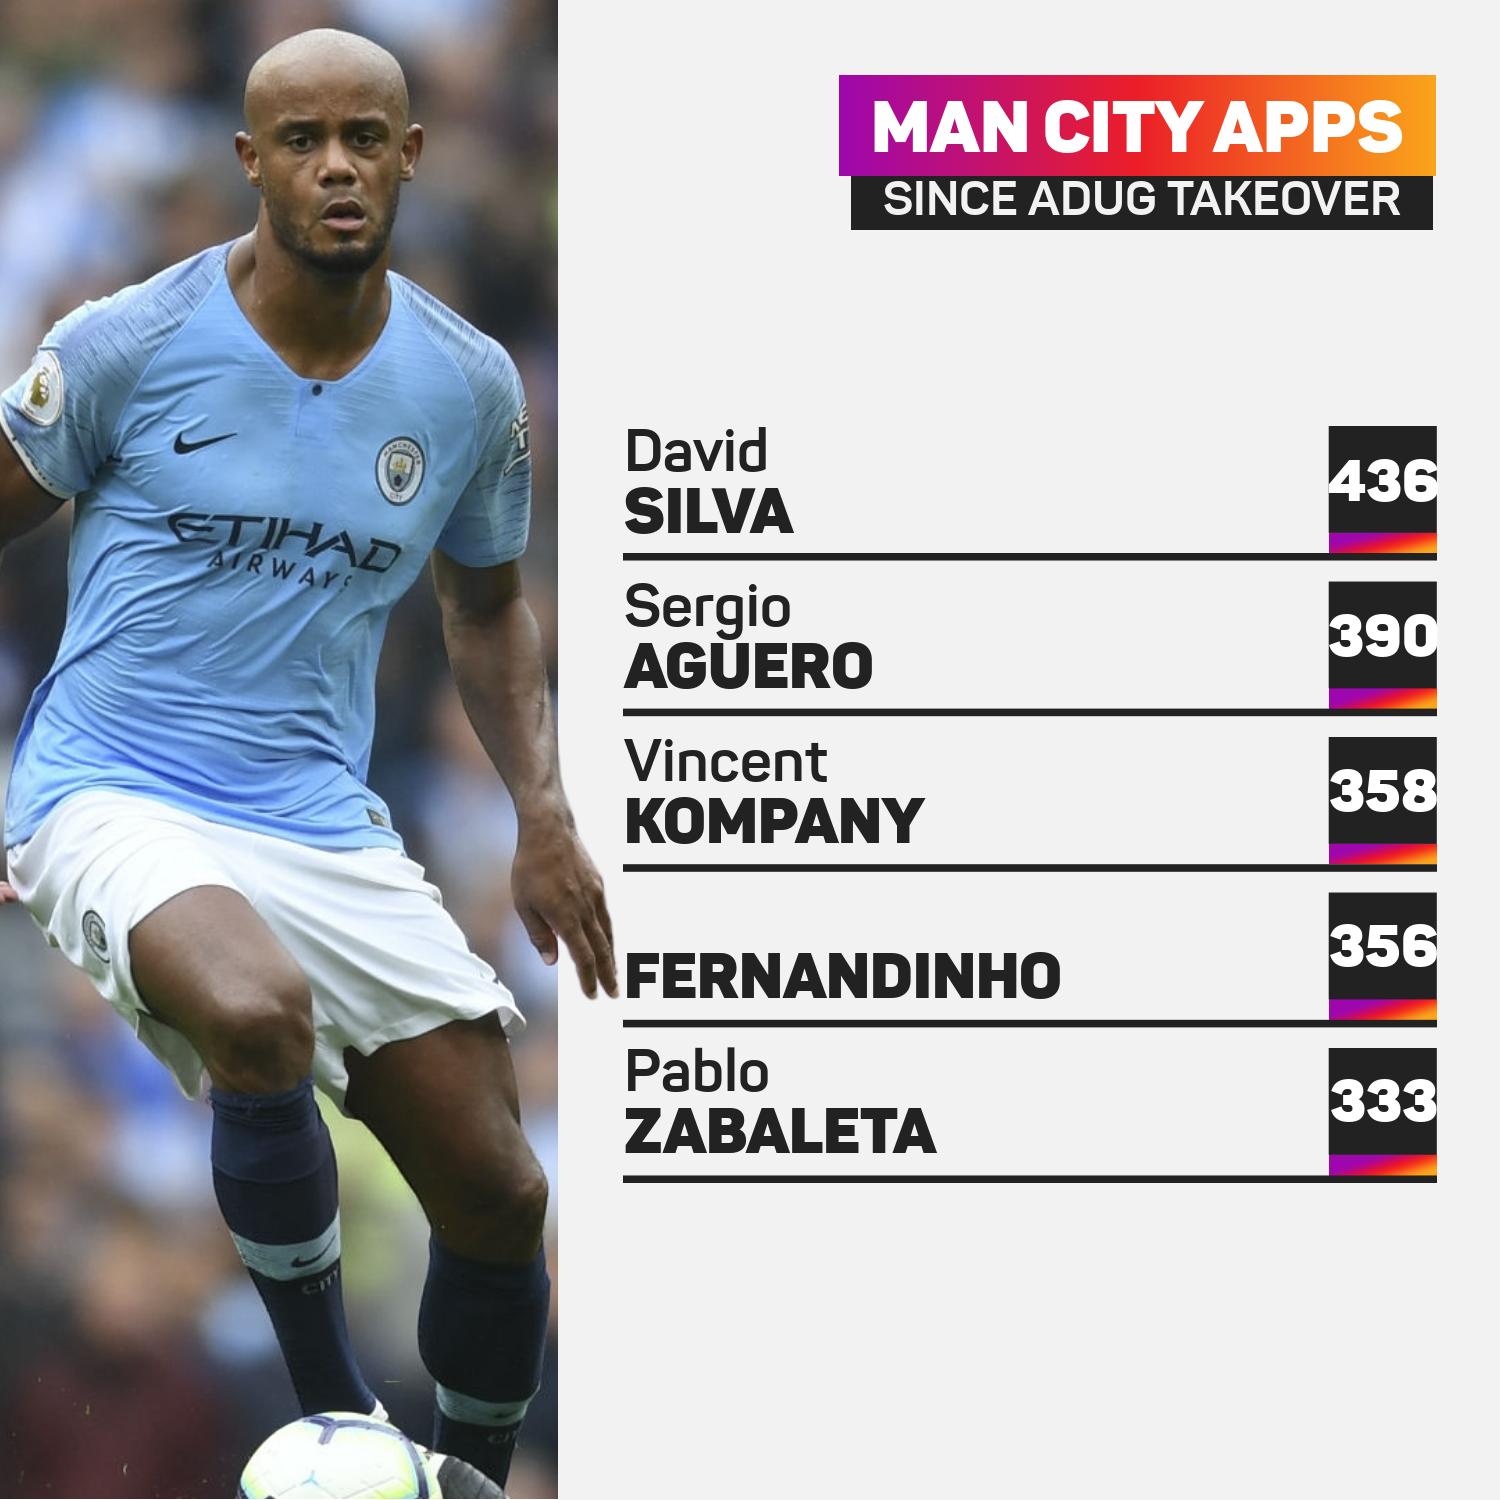 Vincent Kompany was a key man for Manchester City